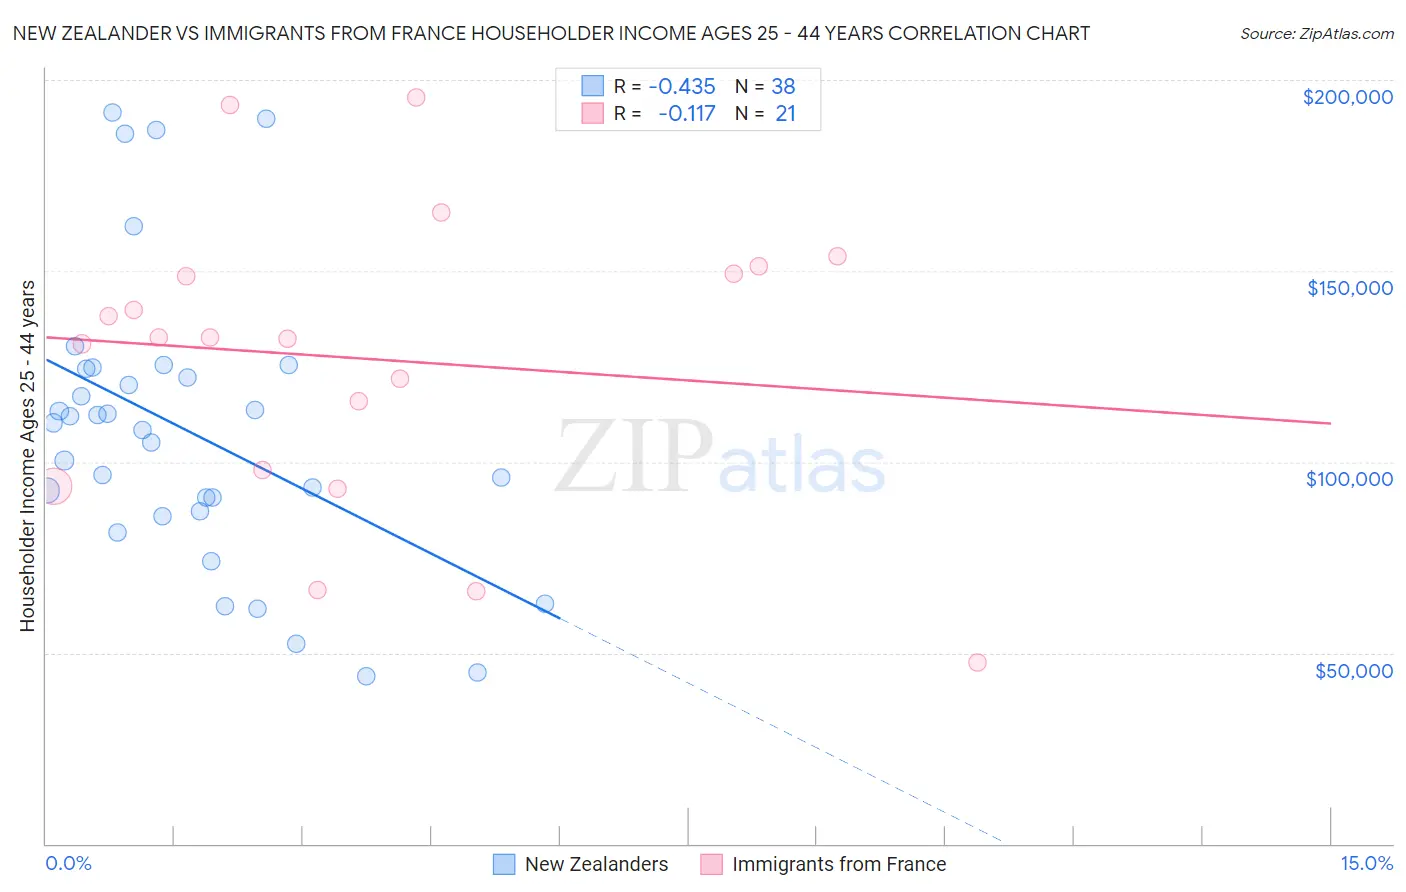 New Zealander vs Immigrants from France Householder Income Ages 25 - 44 years